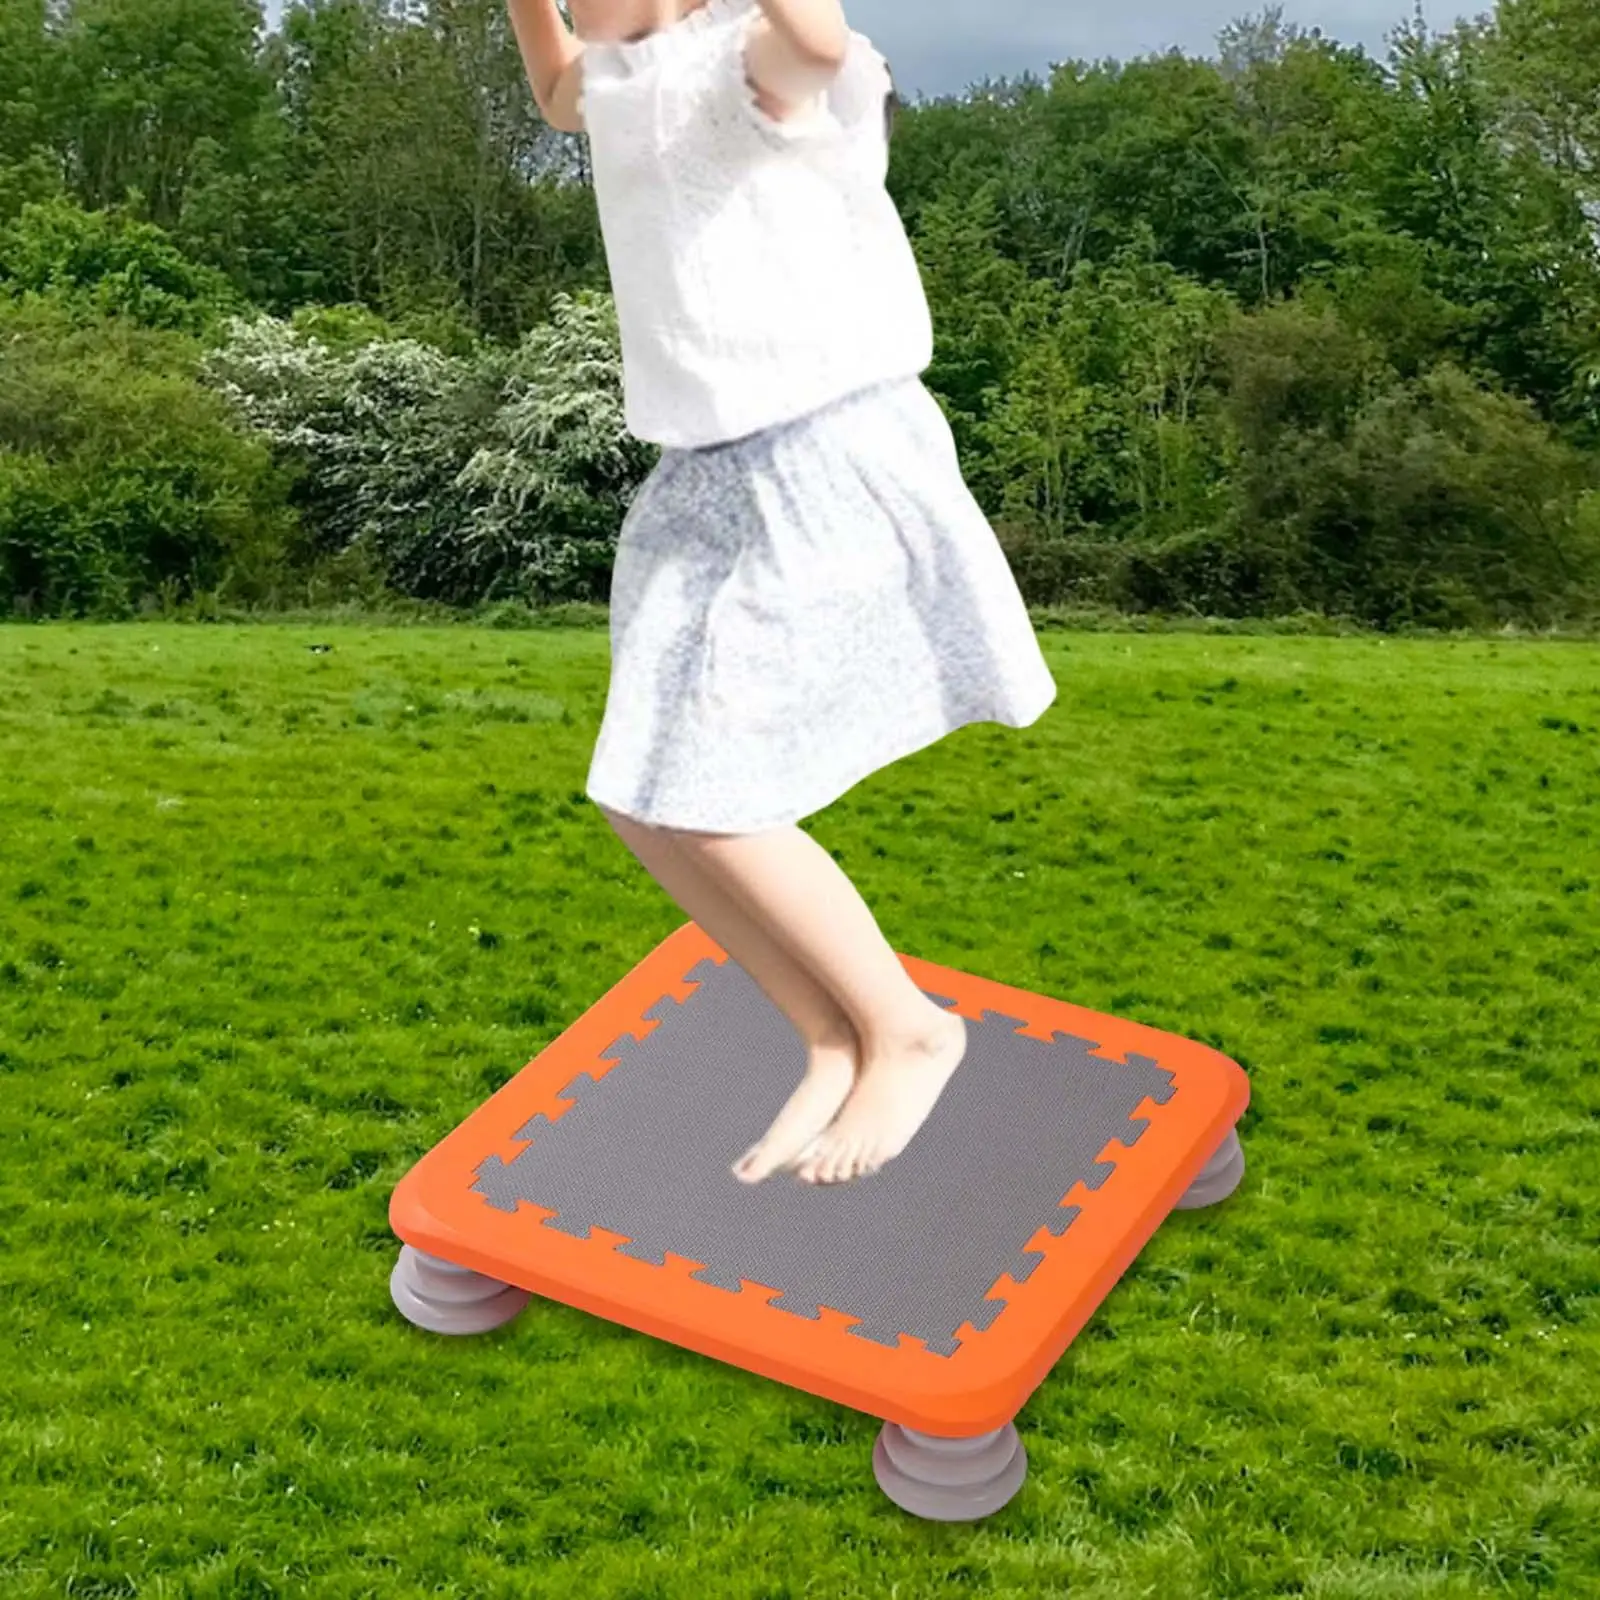 Stable Kids Trampoline Sensory Training Jumping Toy Bouncing Bed Rebounder